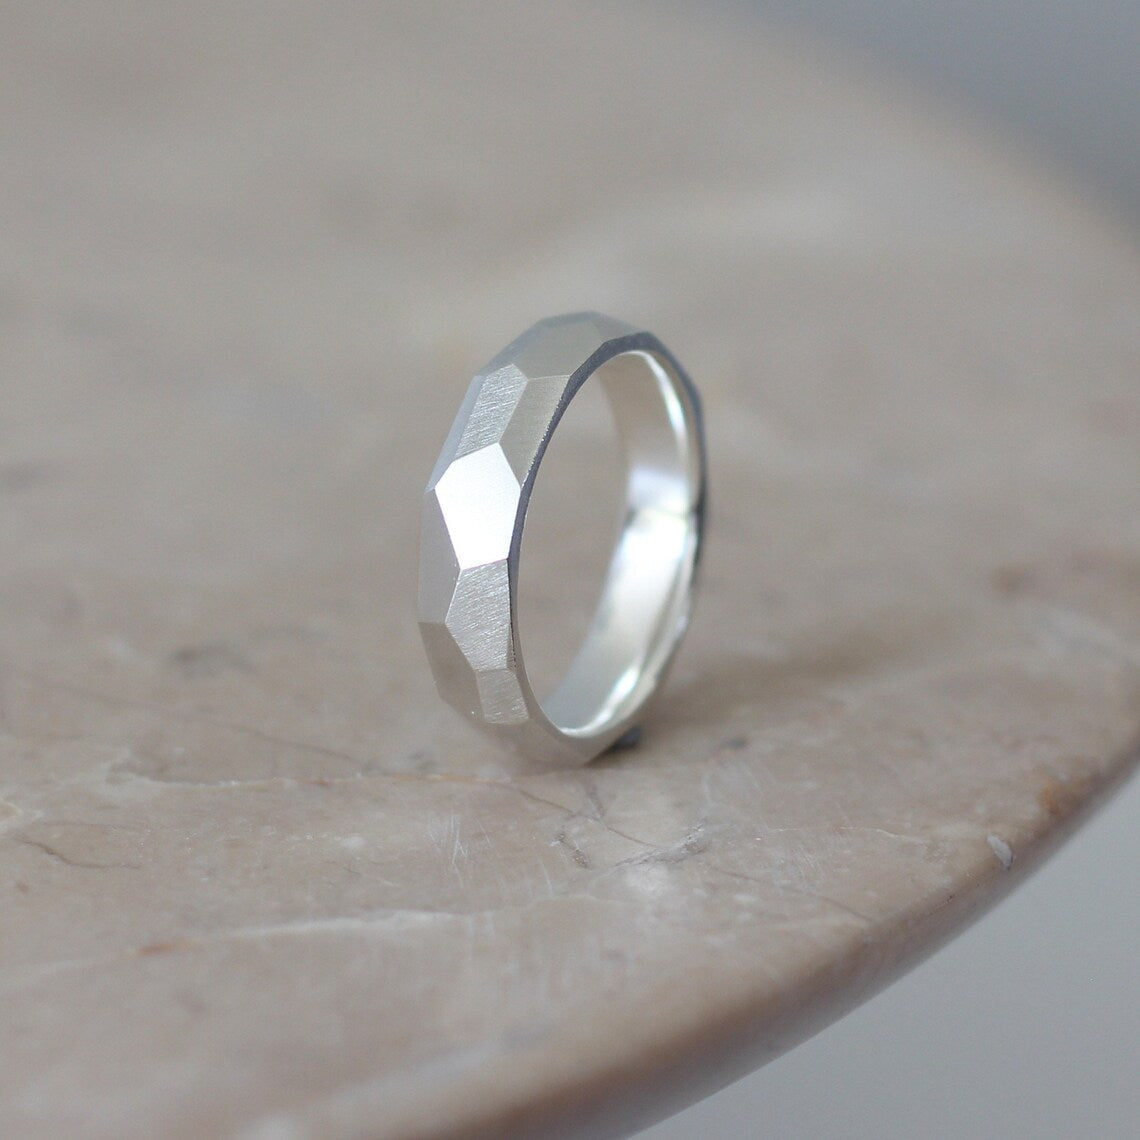 Geometric Faceted Ring 5mm - Silver/Oxidised